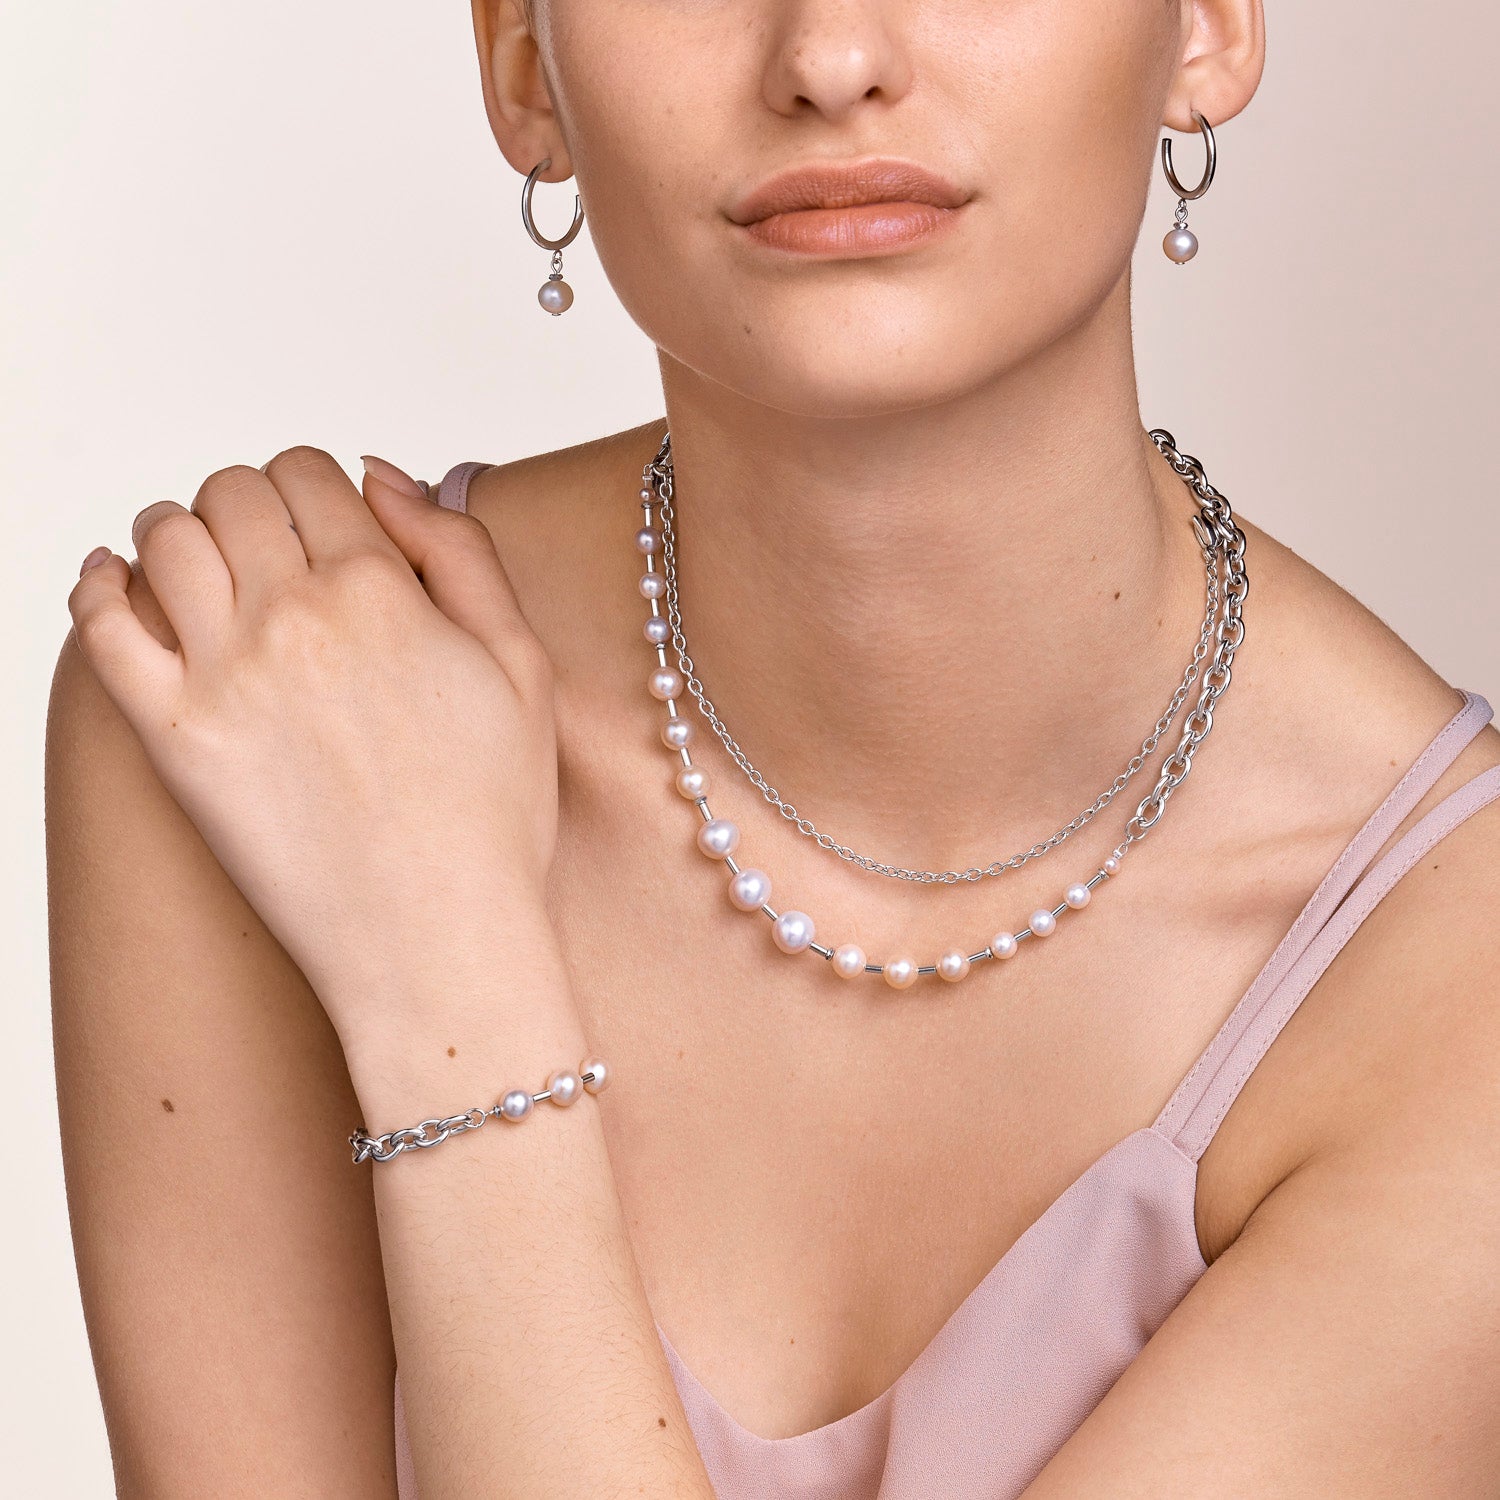 Necklace Freshwater pearls & chunky chain 4-in-1 white-silver